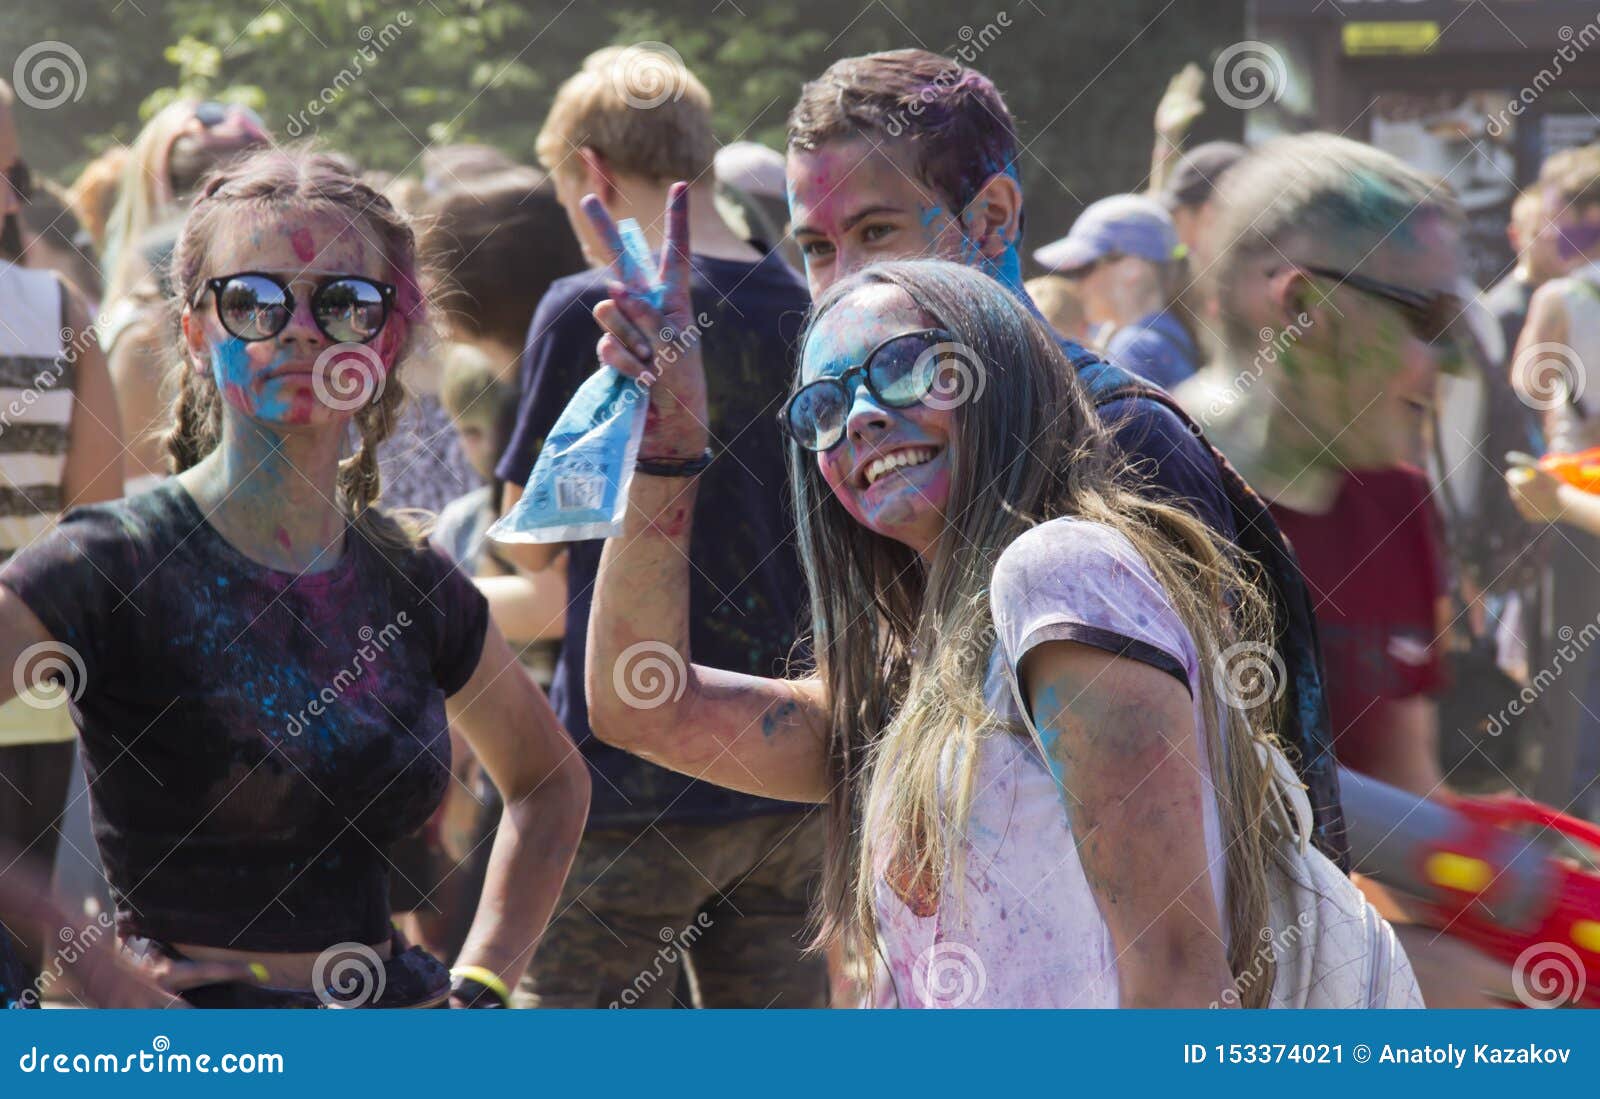 Russia, Krasnoyarsk, June 2019: Young People Play with Colors. the